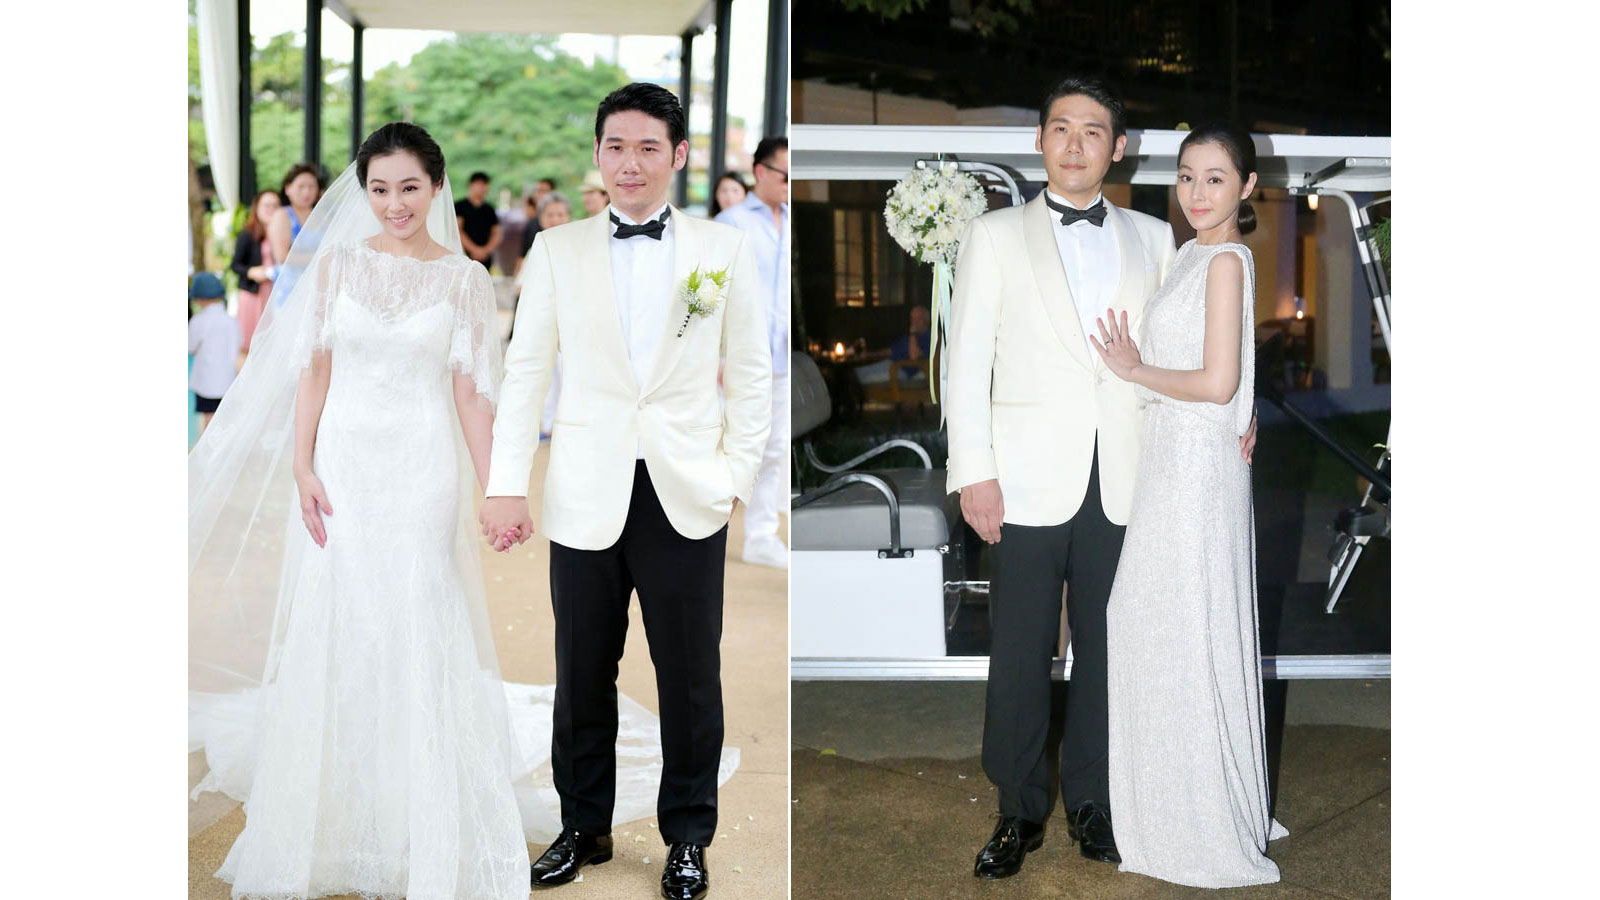 Tammy Chen ties the knot in Thailand - 8days